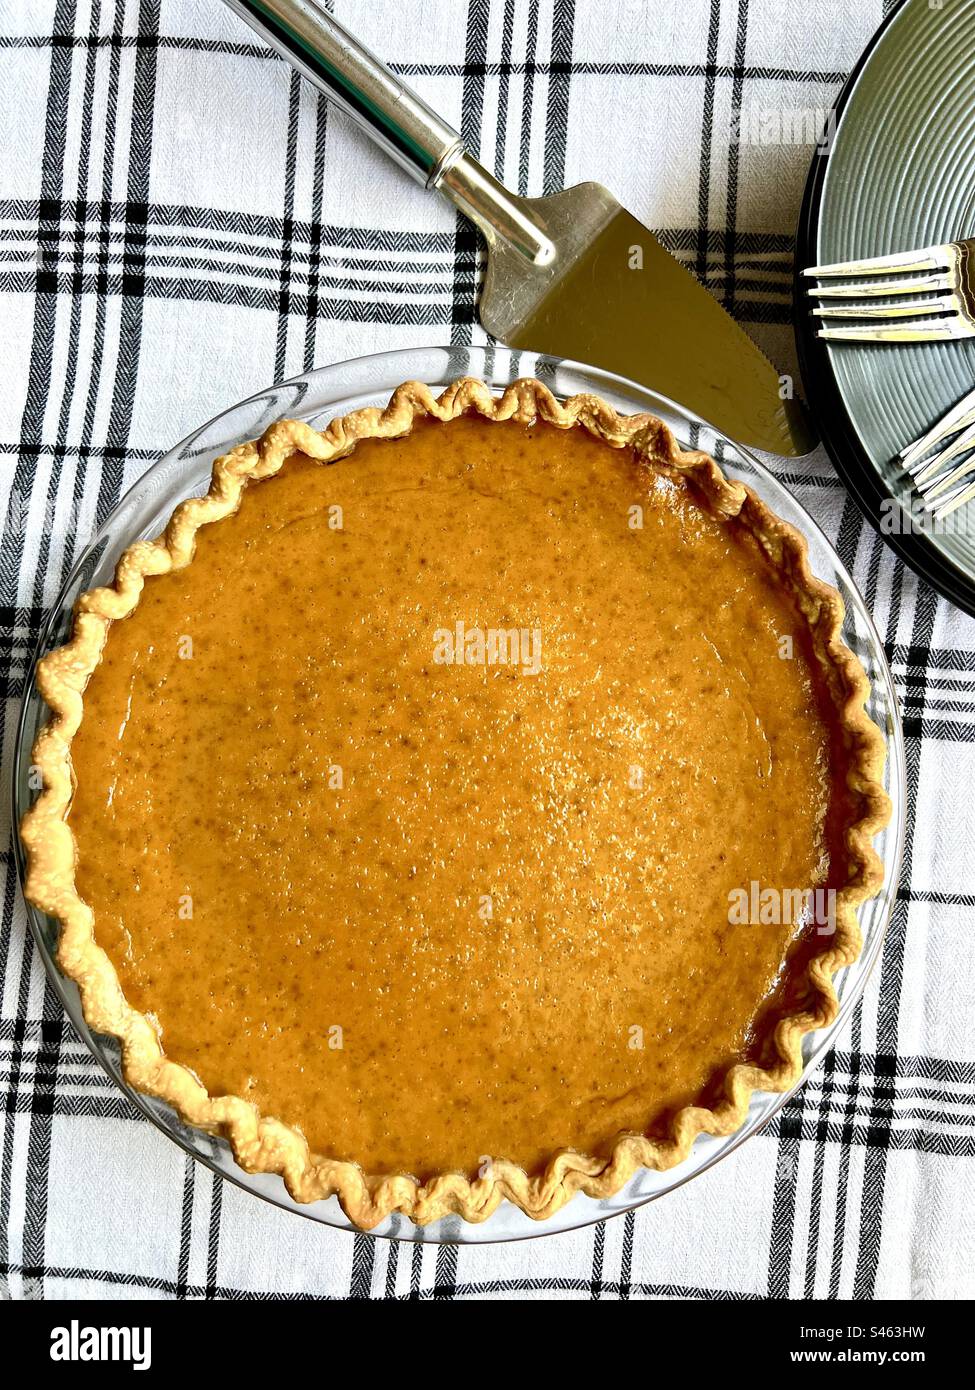 Top view of a whole pumpkin pie Stock Photo